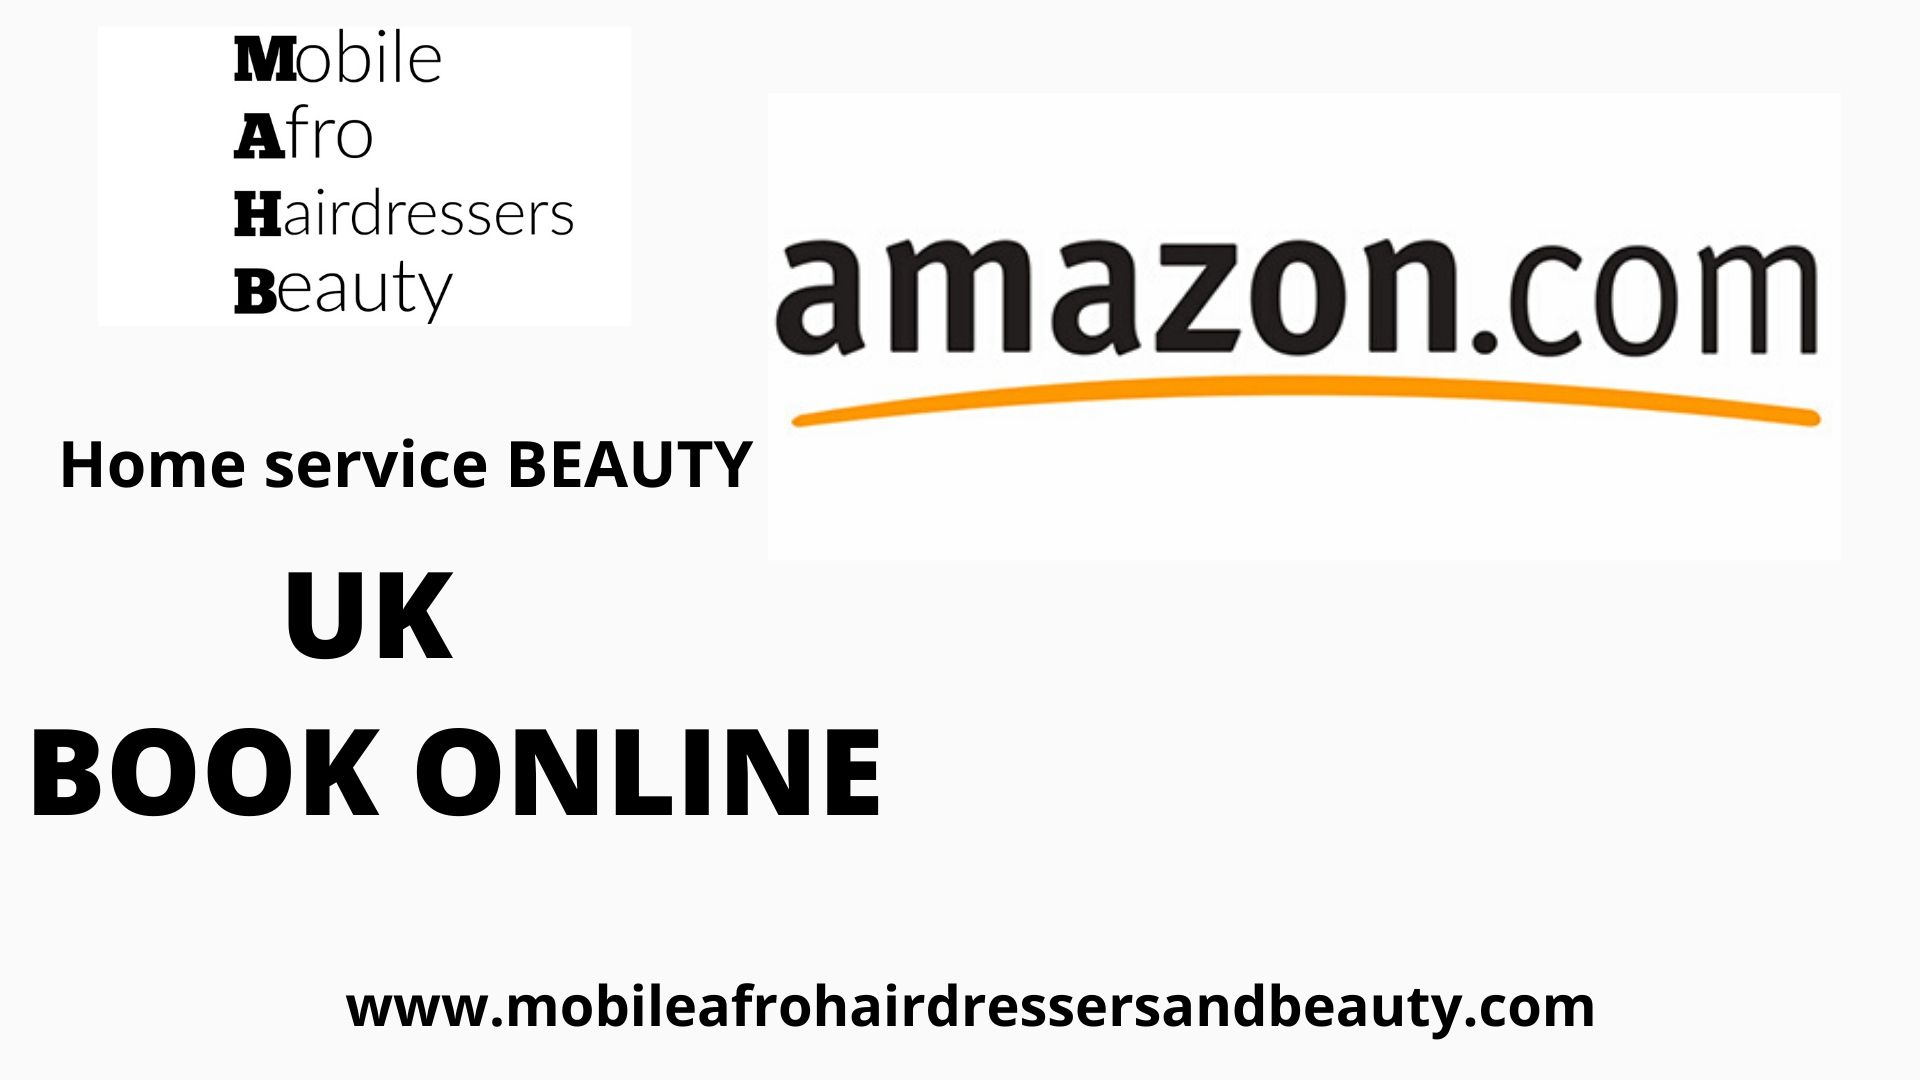 Hairdressers And Makeup Artist Tools And Equipment with Amazon  Links